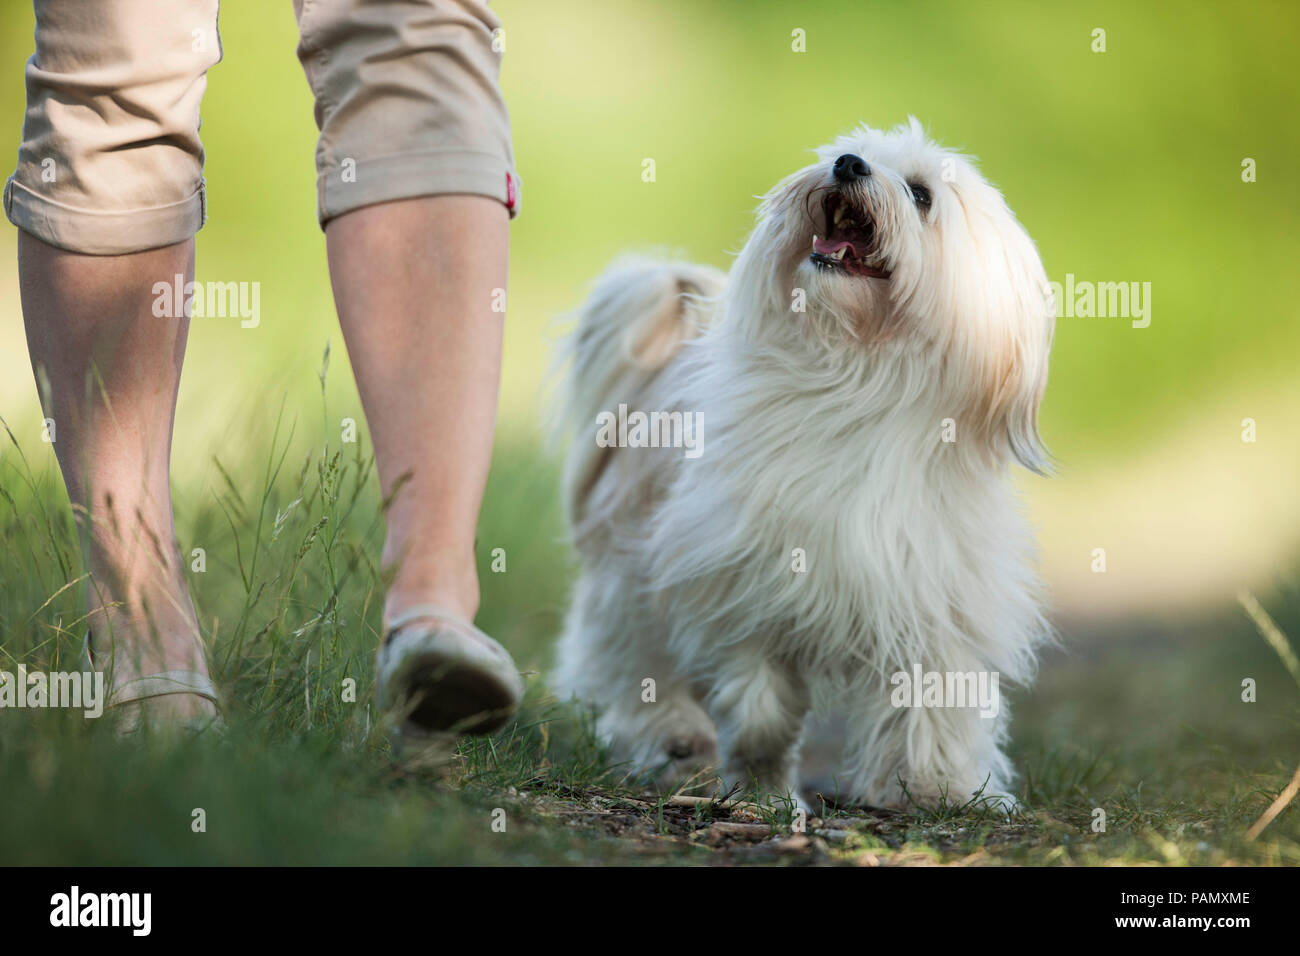 Havanese. Adult dog walking next to a man, looking up. Germany Stock Photo